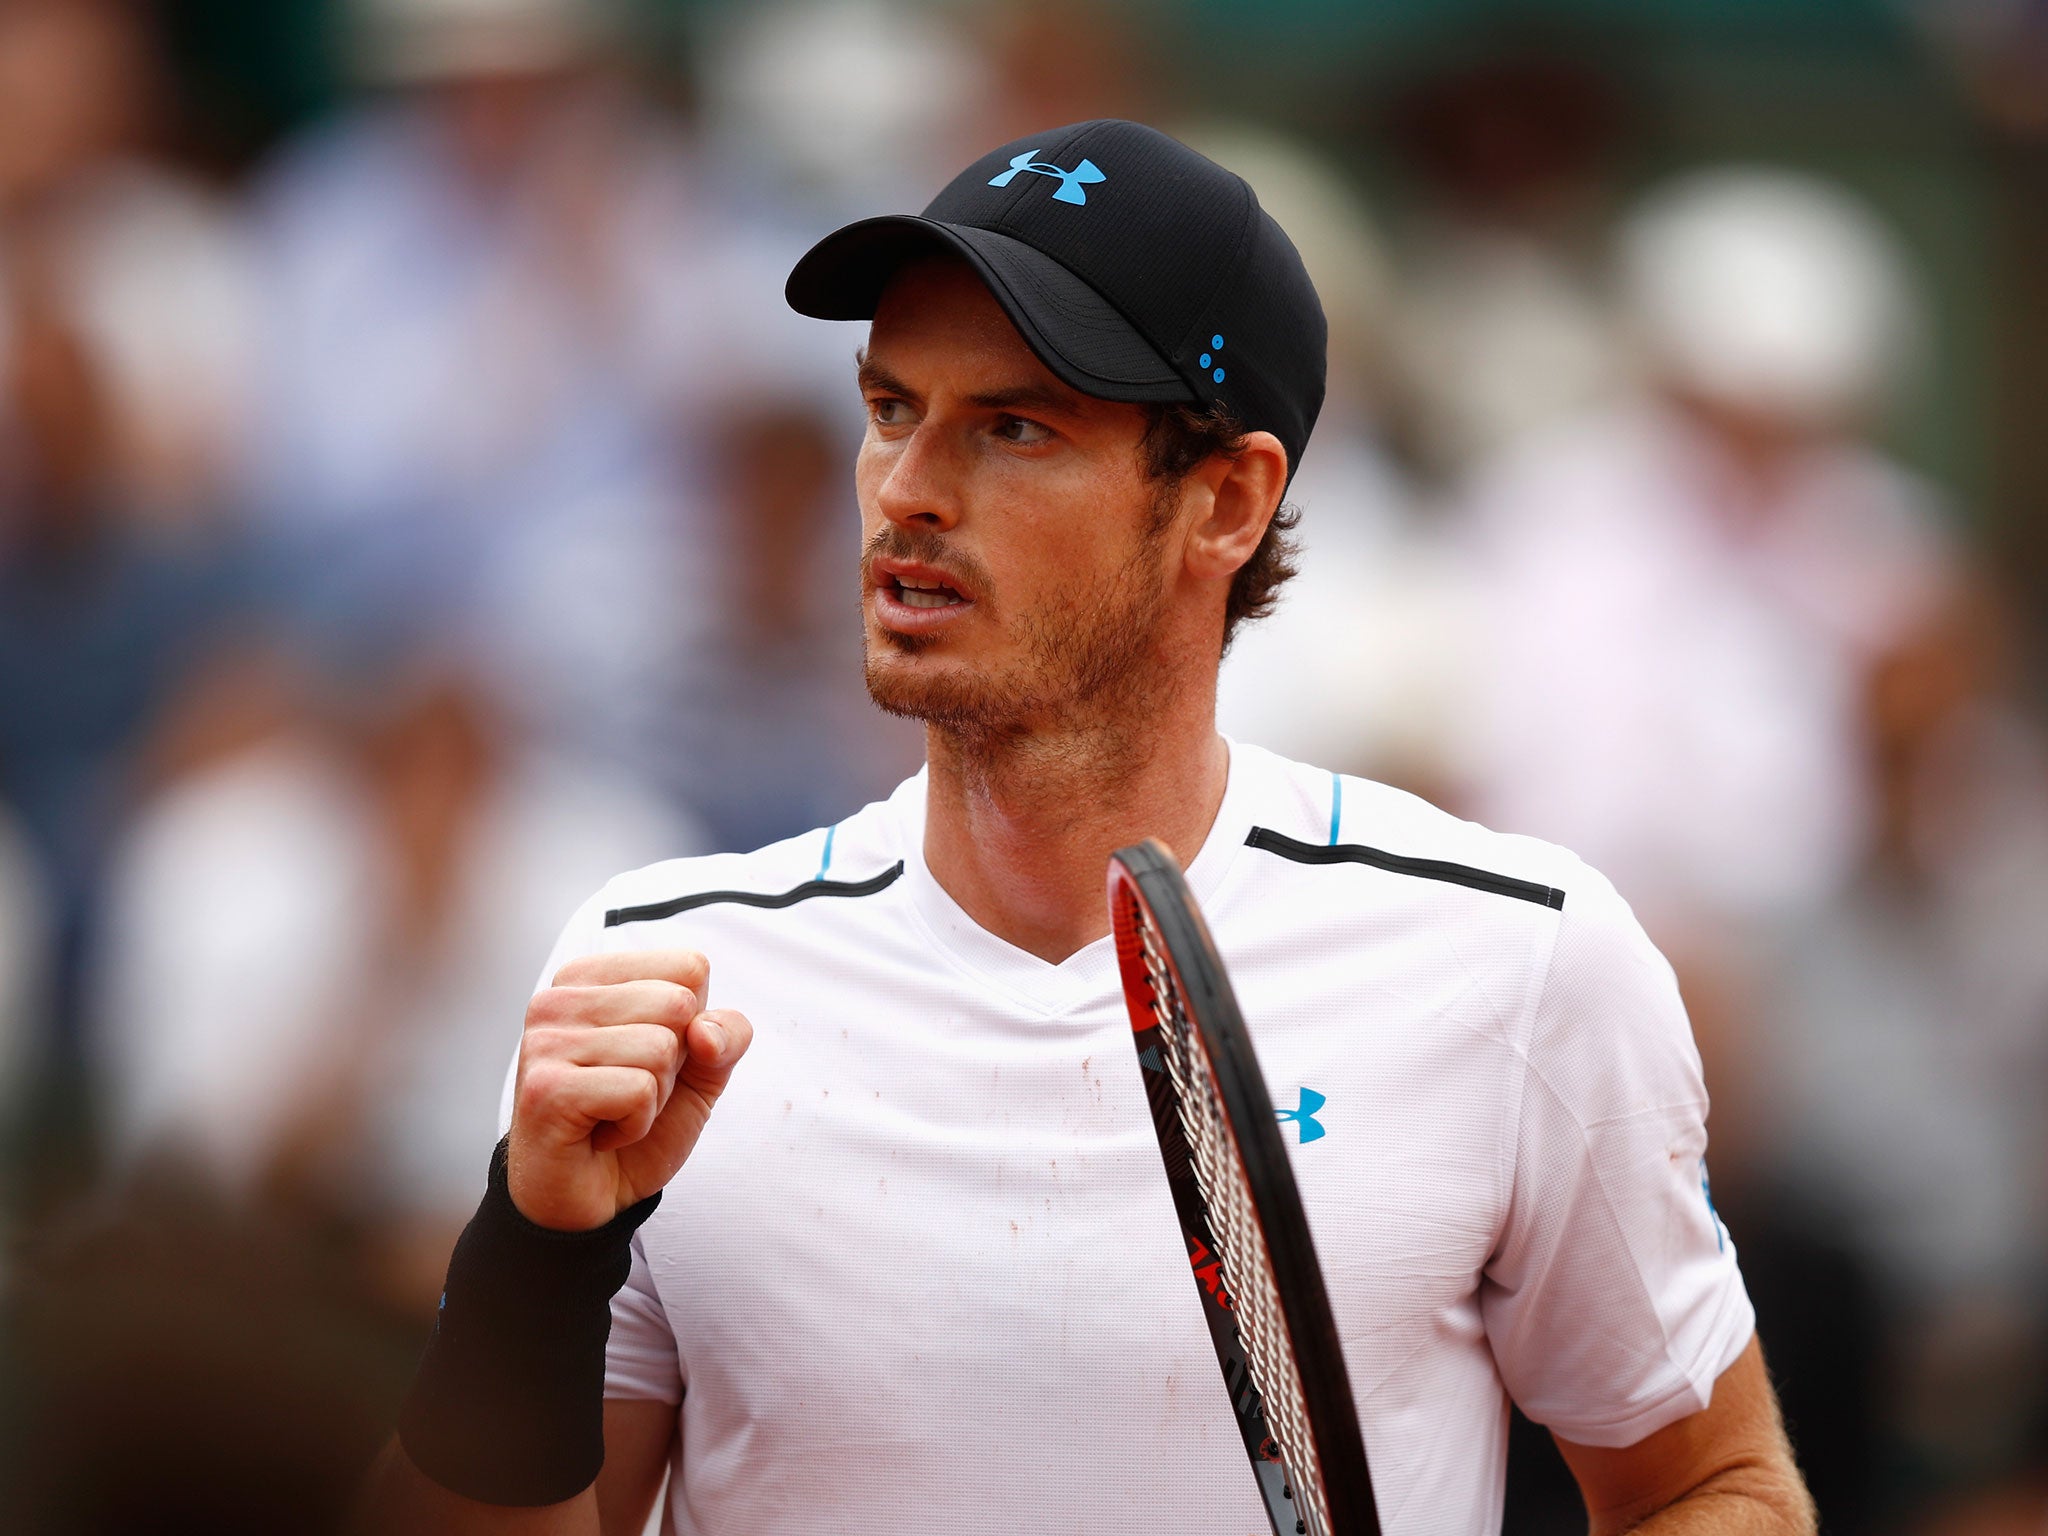 Murray will play Nishikori for a place in the semi-finals of the French Open